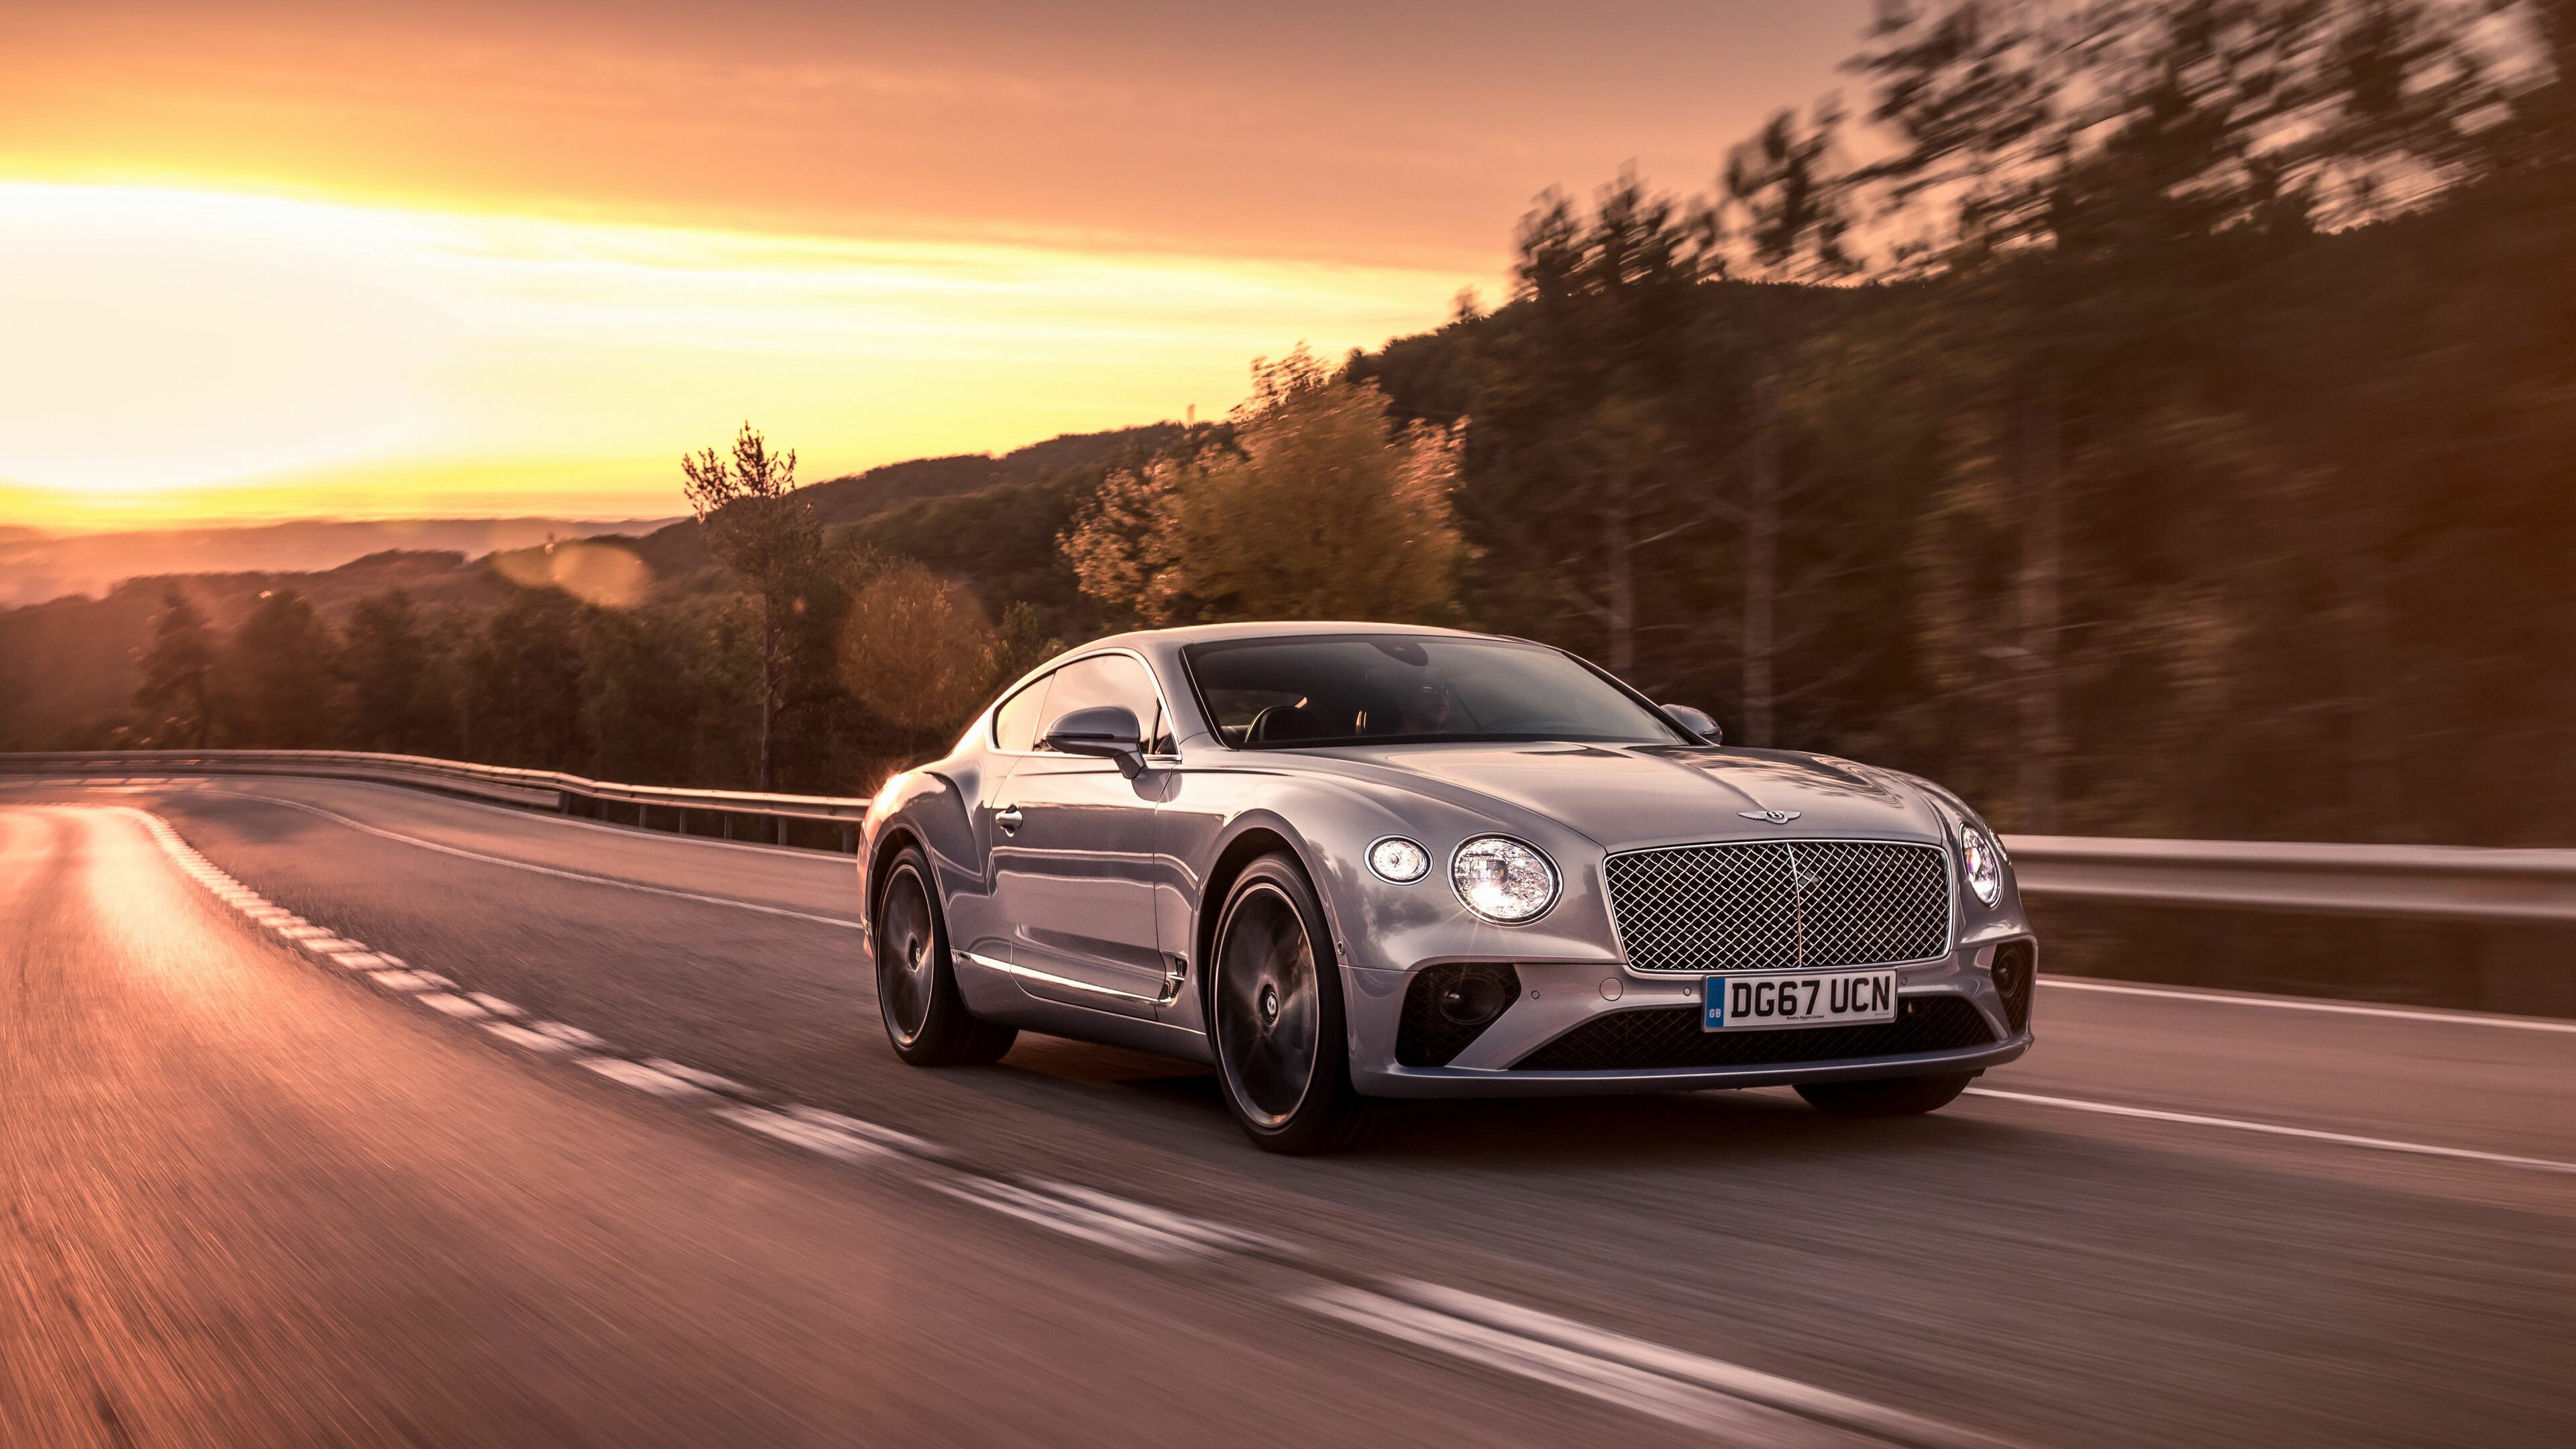 Bentley: A British designer, manufacturer, and marketer of luxury cars and SUVs, headquartered in Crewe, England. 3840x2160 4K Background.